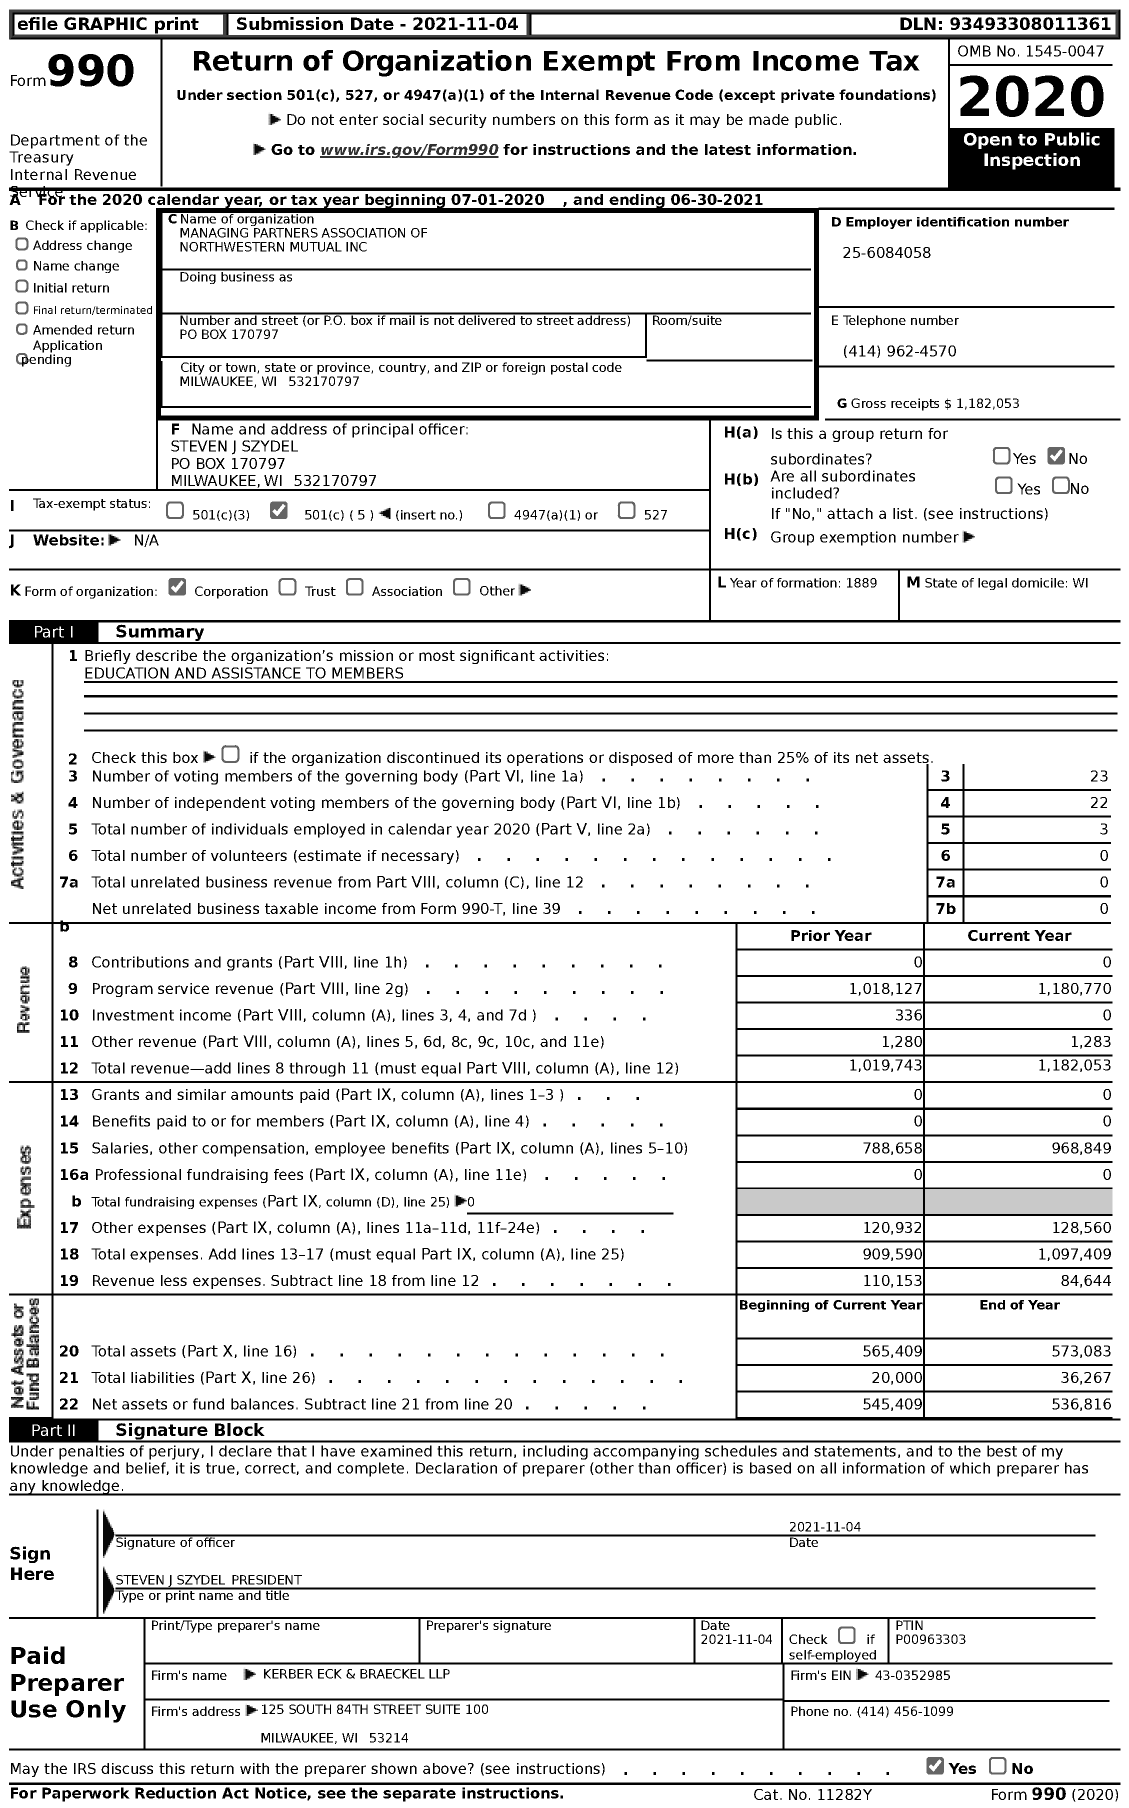 Image of first page of 2020 Form 990 for Managing Partners Association of Northwestern Mutual